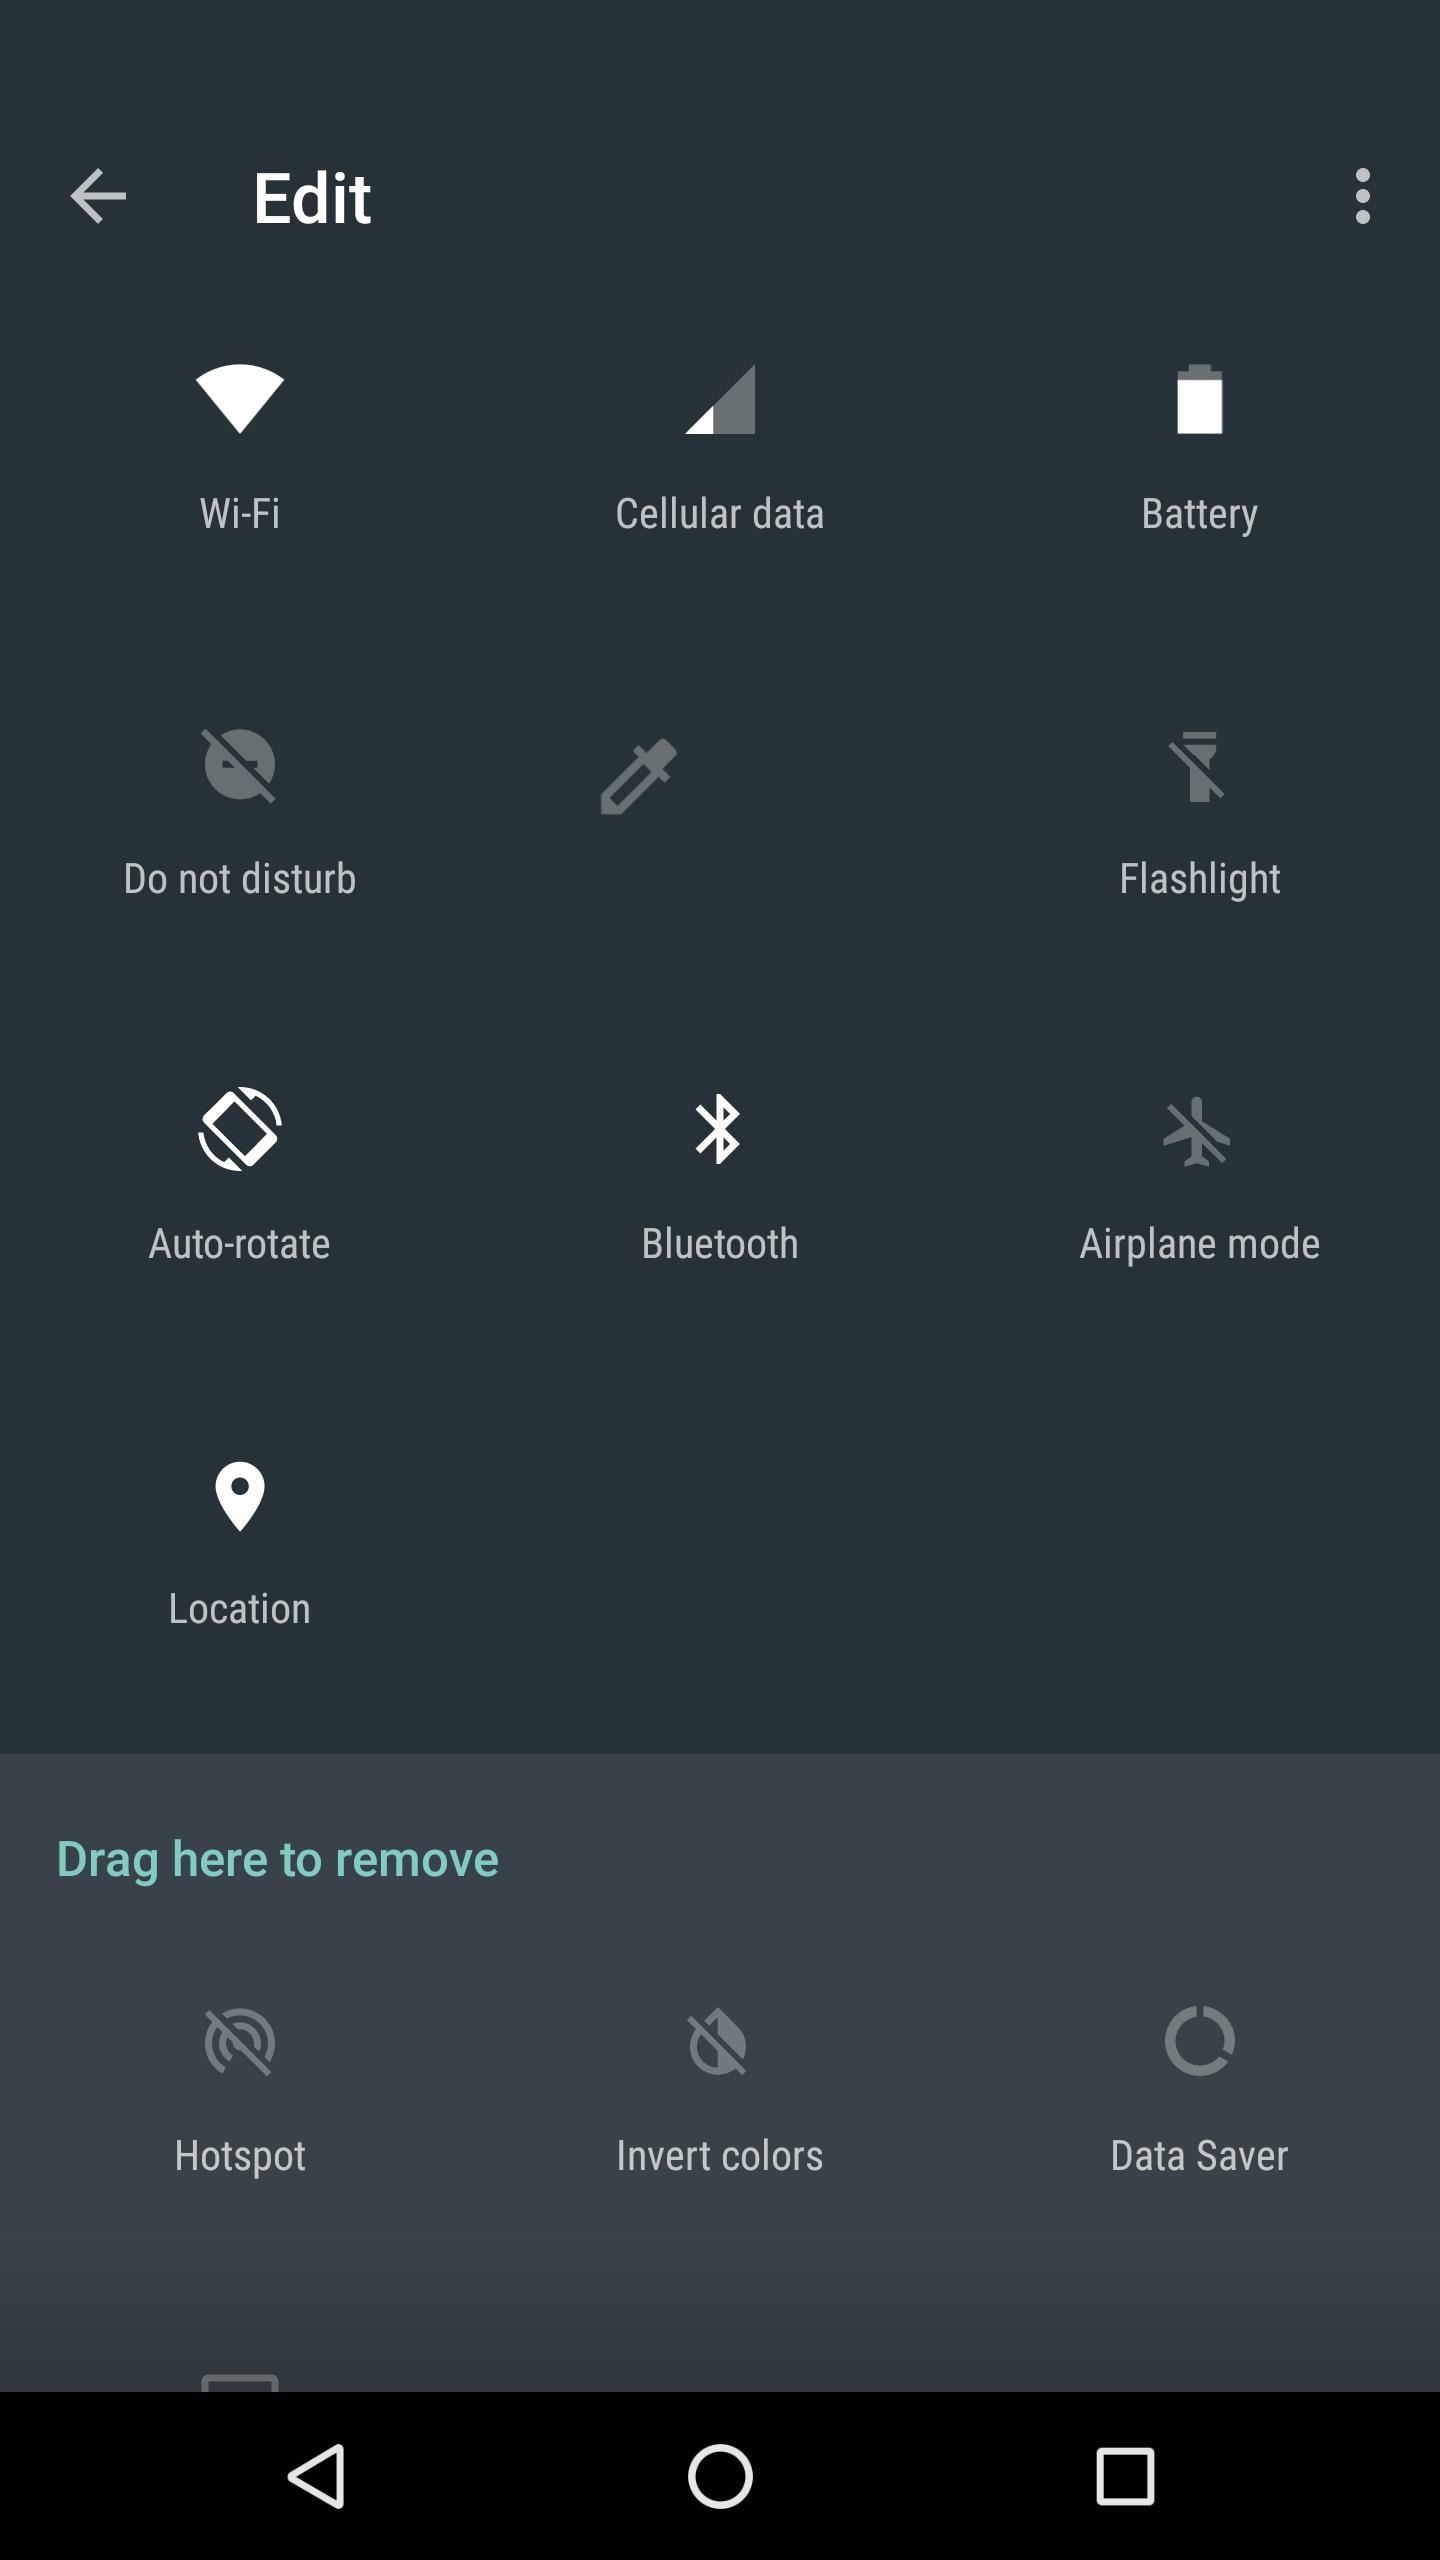 How to Enable the Hidden 'Night Mode' Setting on Android 7.0 Nougat